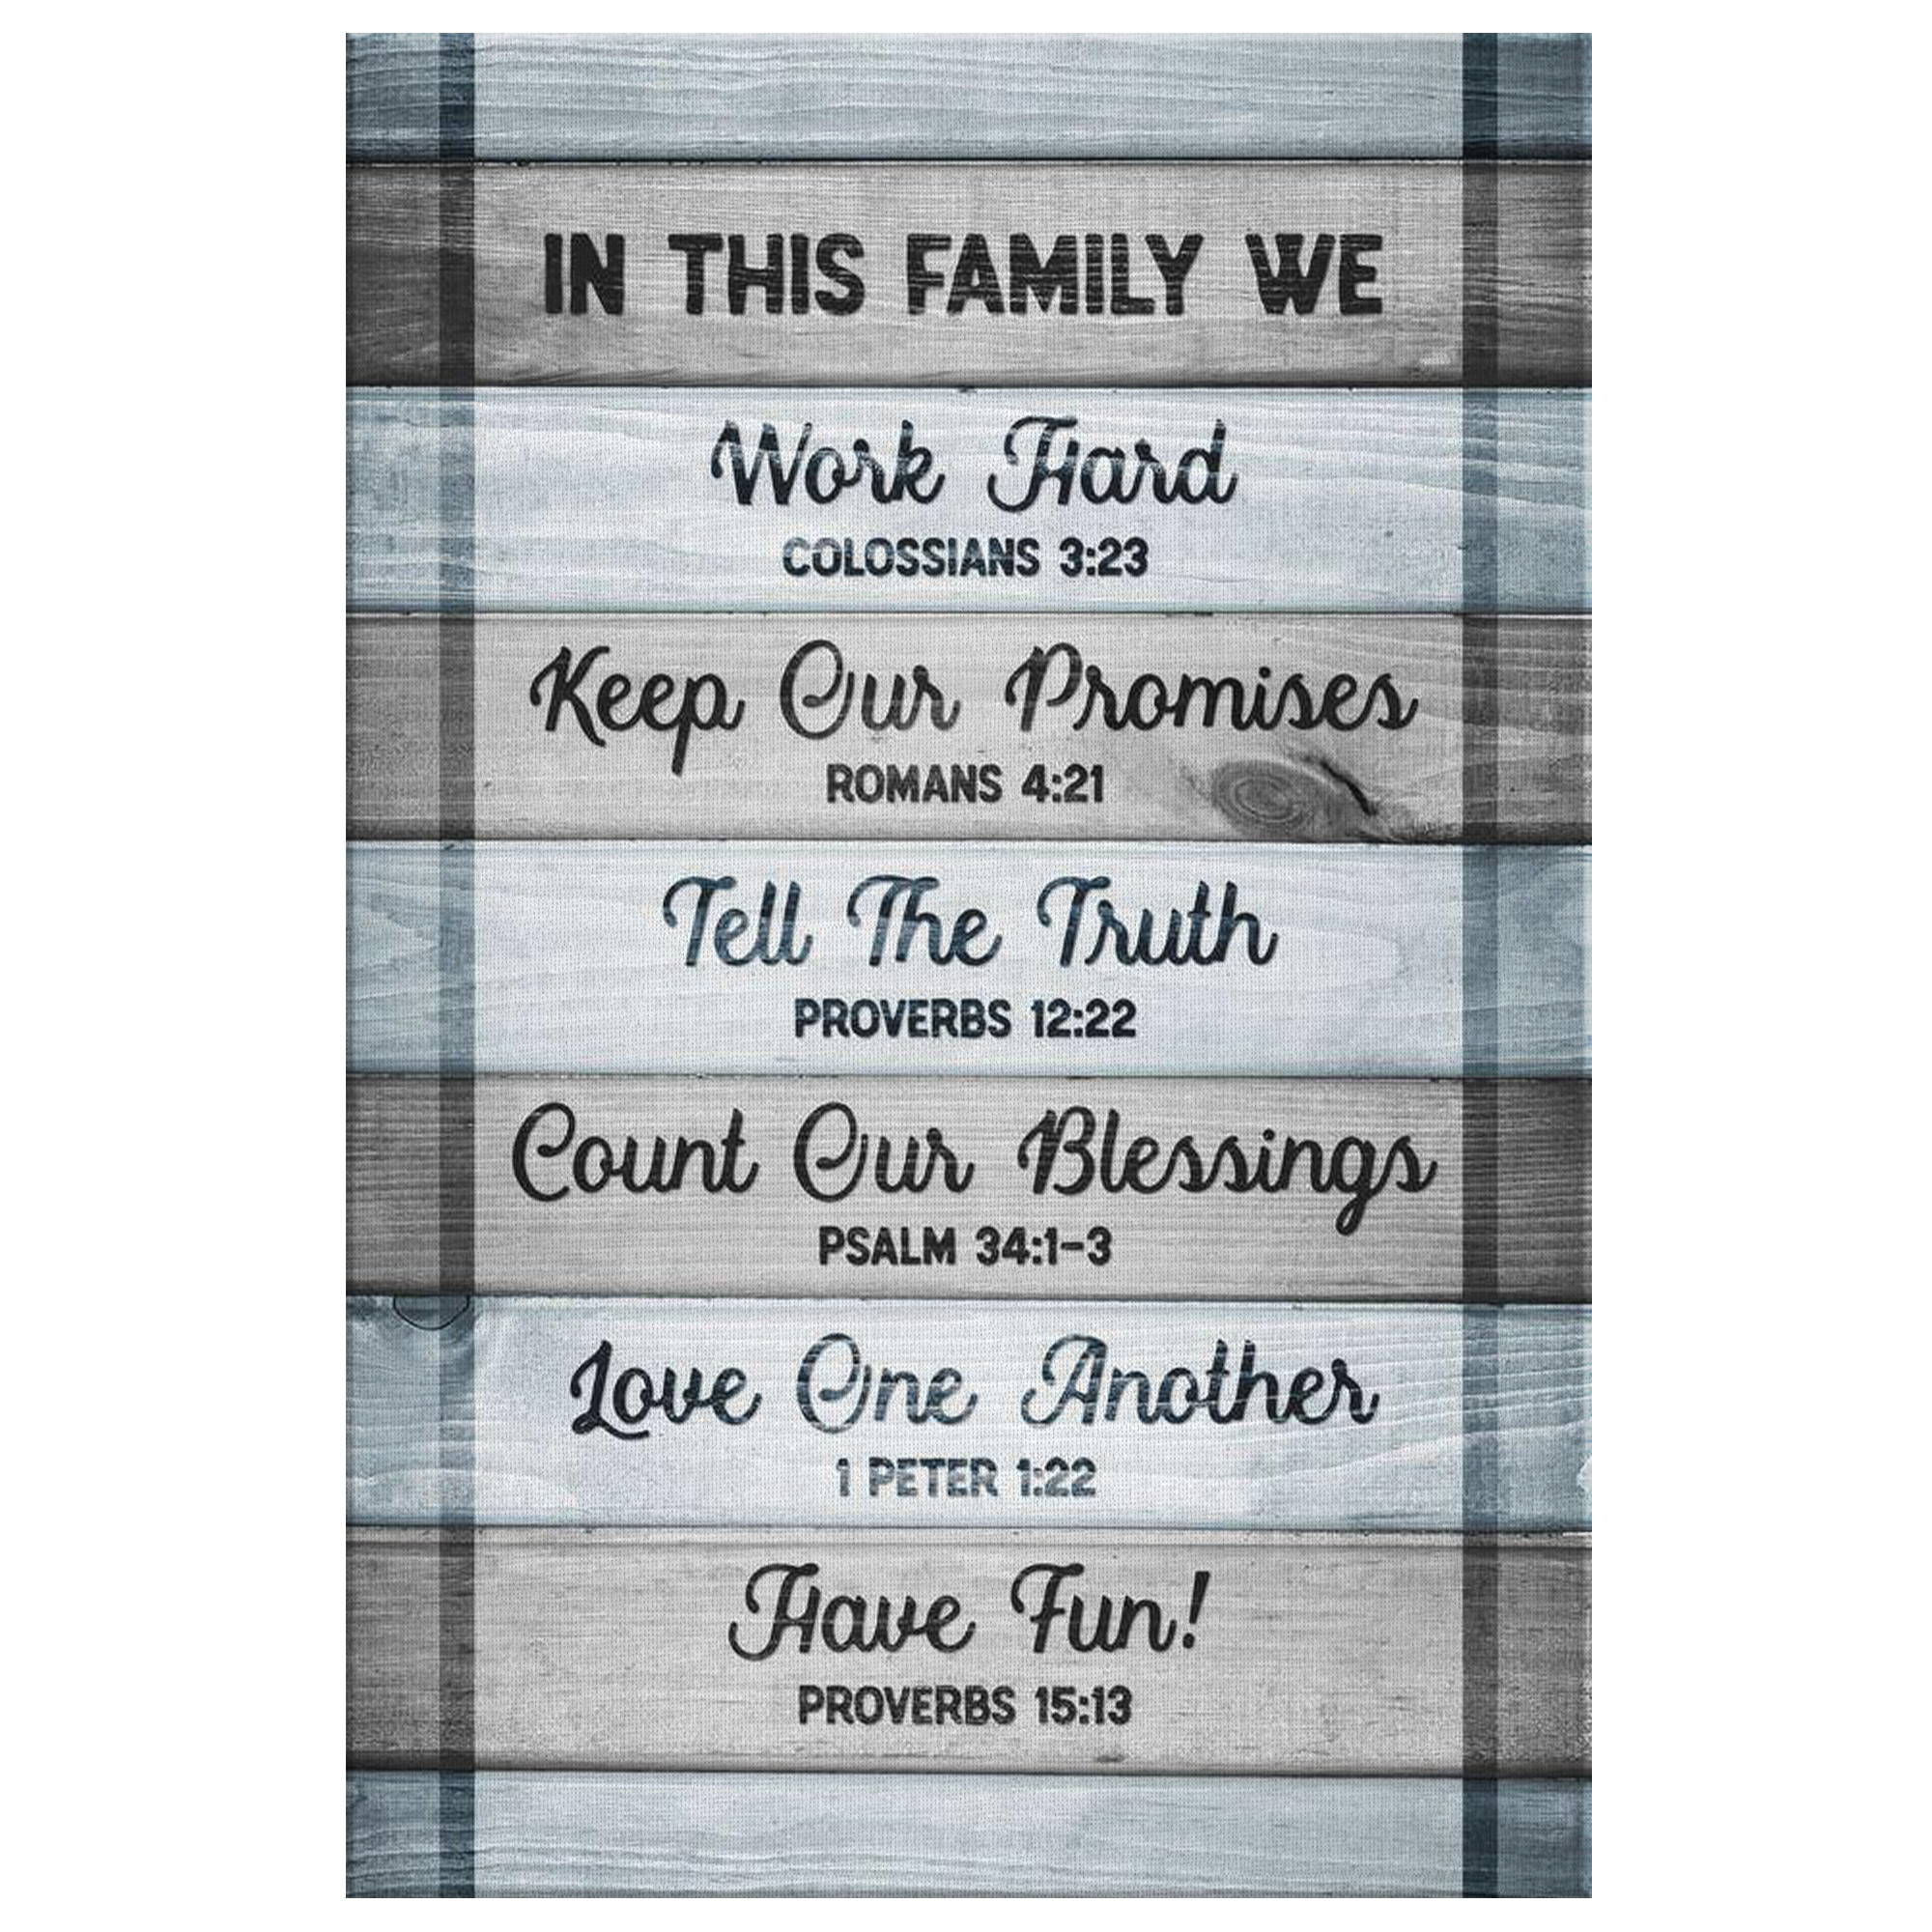 Biblical Quotes About Family
 "In this Family Bible Quotes" Premium Canvas GearDen